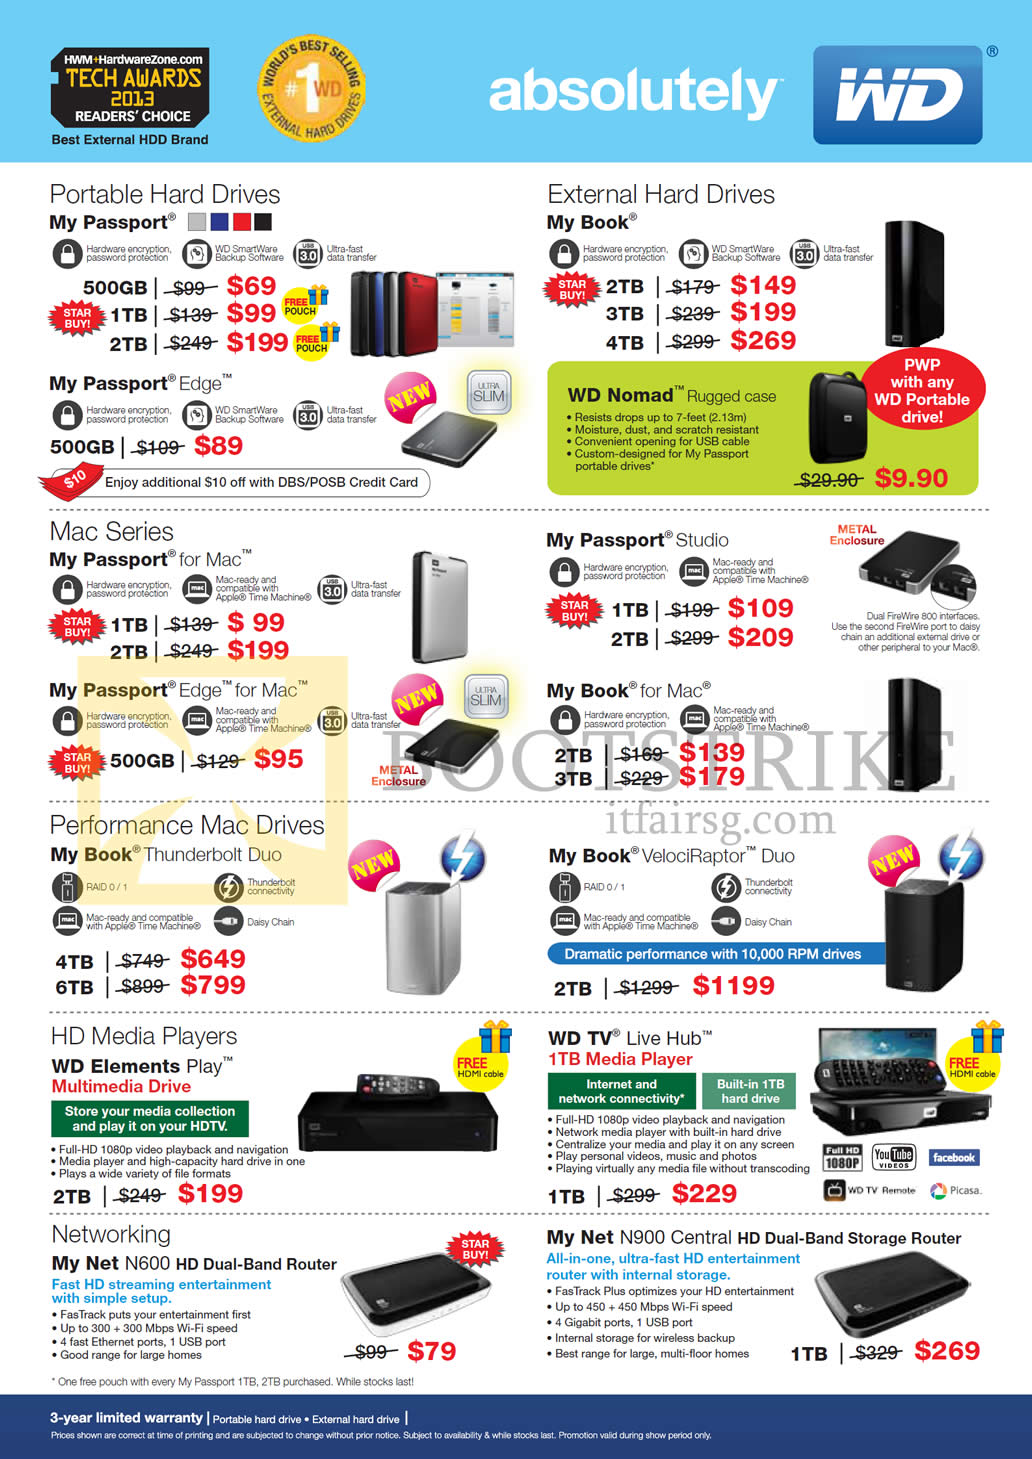 IT SHOW 2013 price list image brochure of Western Digital WD External Storage My Passport, Edge, Book, For Mac, Studio, My Book Thunderbolt Duo, Media Player Elements Play, TV Live Hub, My Net N600 Wireless Router, N900